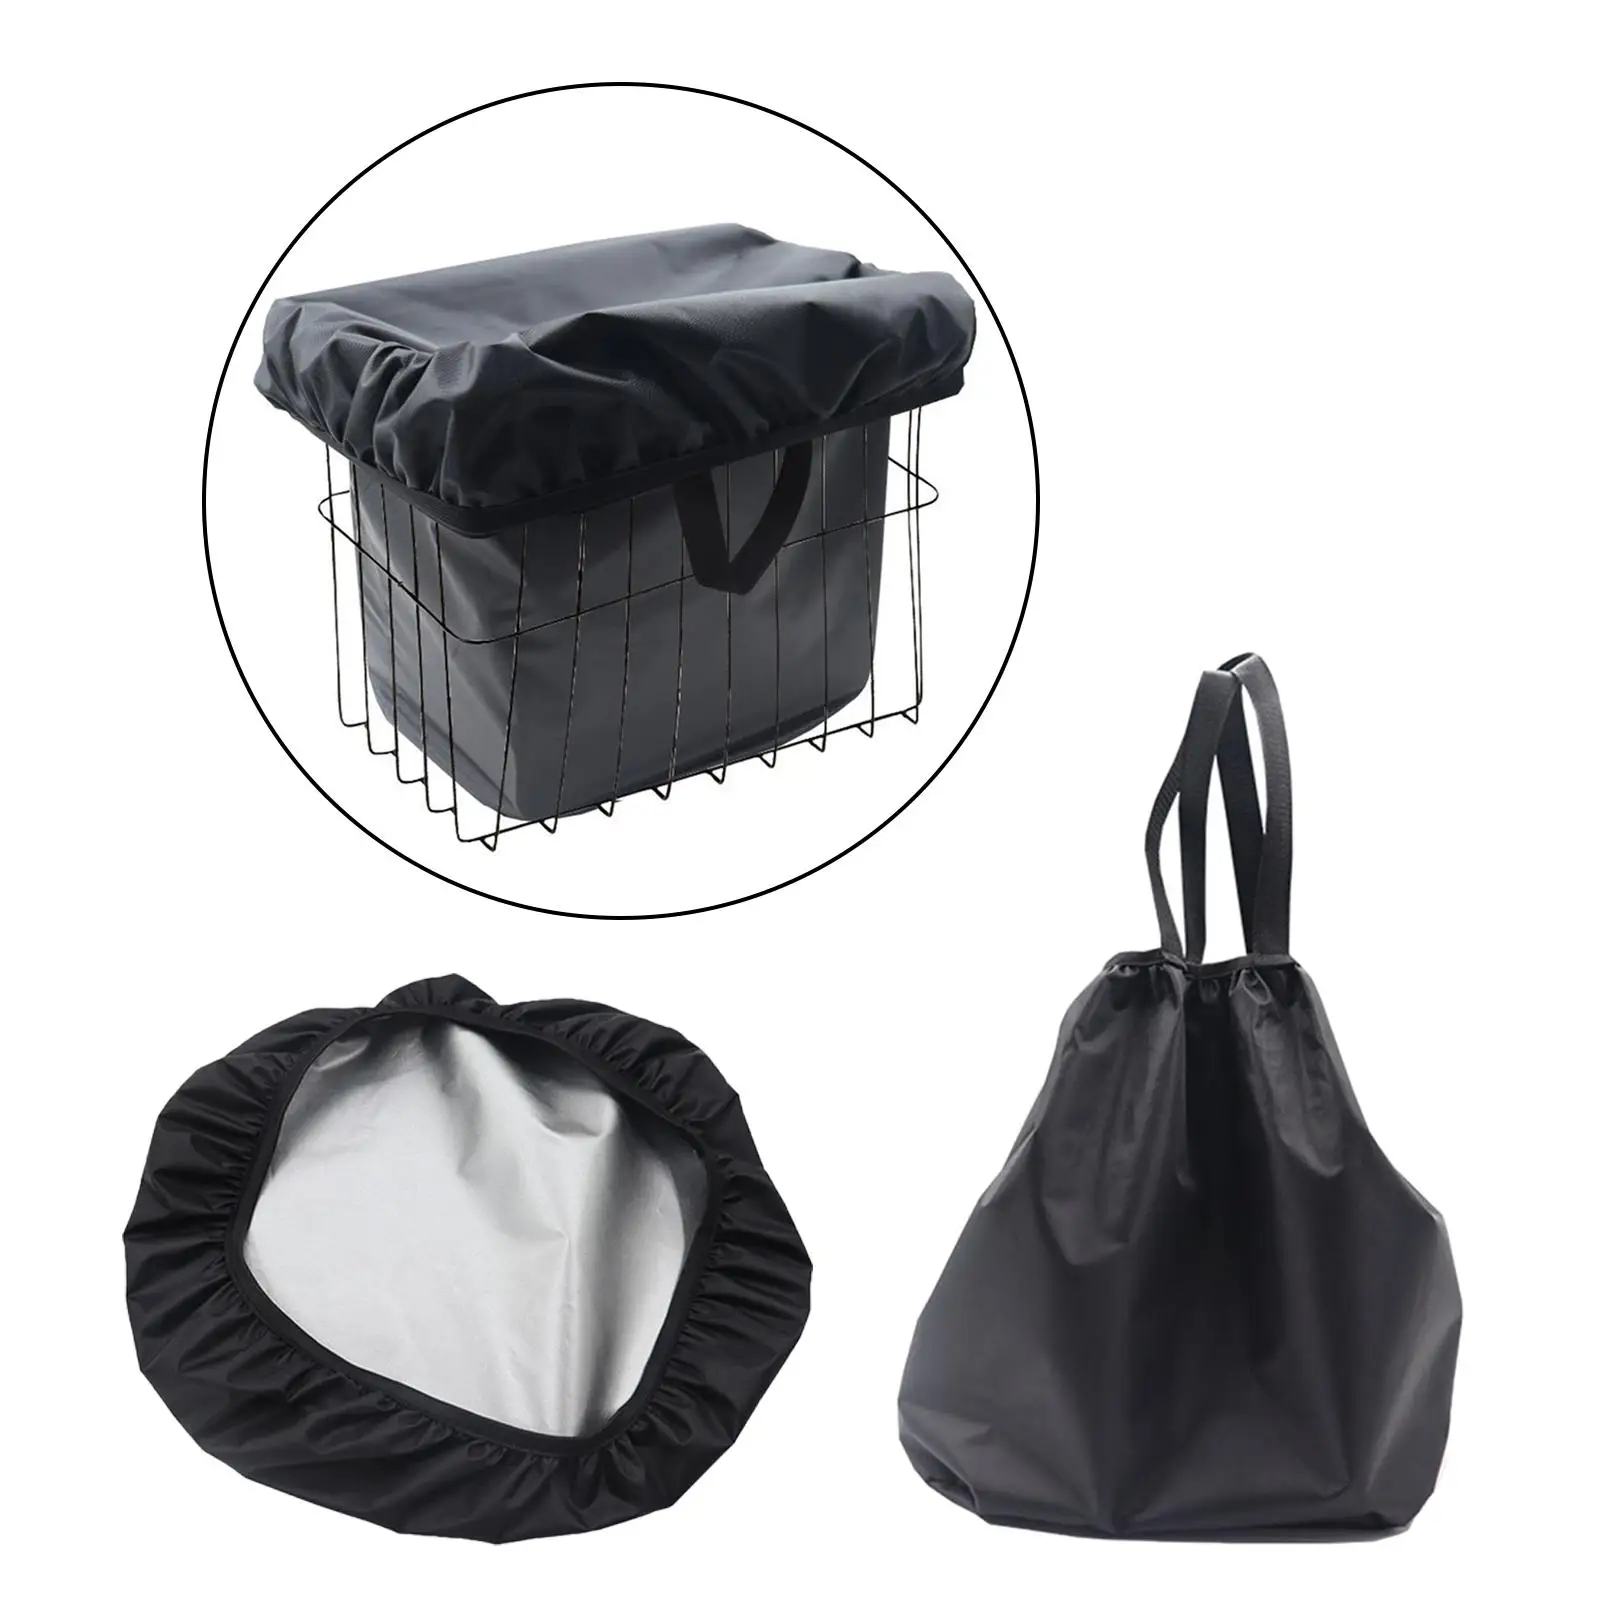 420D Oxford Fabric Basket Liner, Rain Cover Portable Washable Bike Basket Lining for Most Baskets Accessory